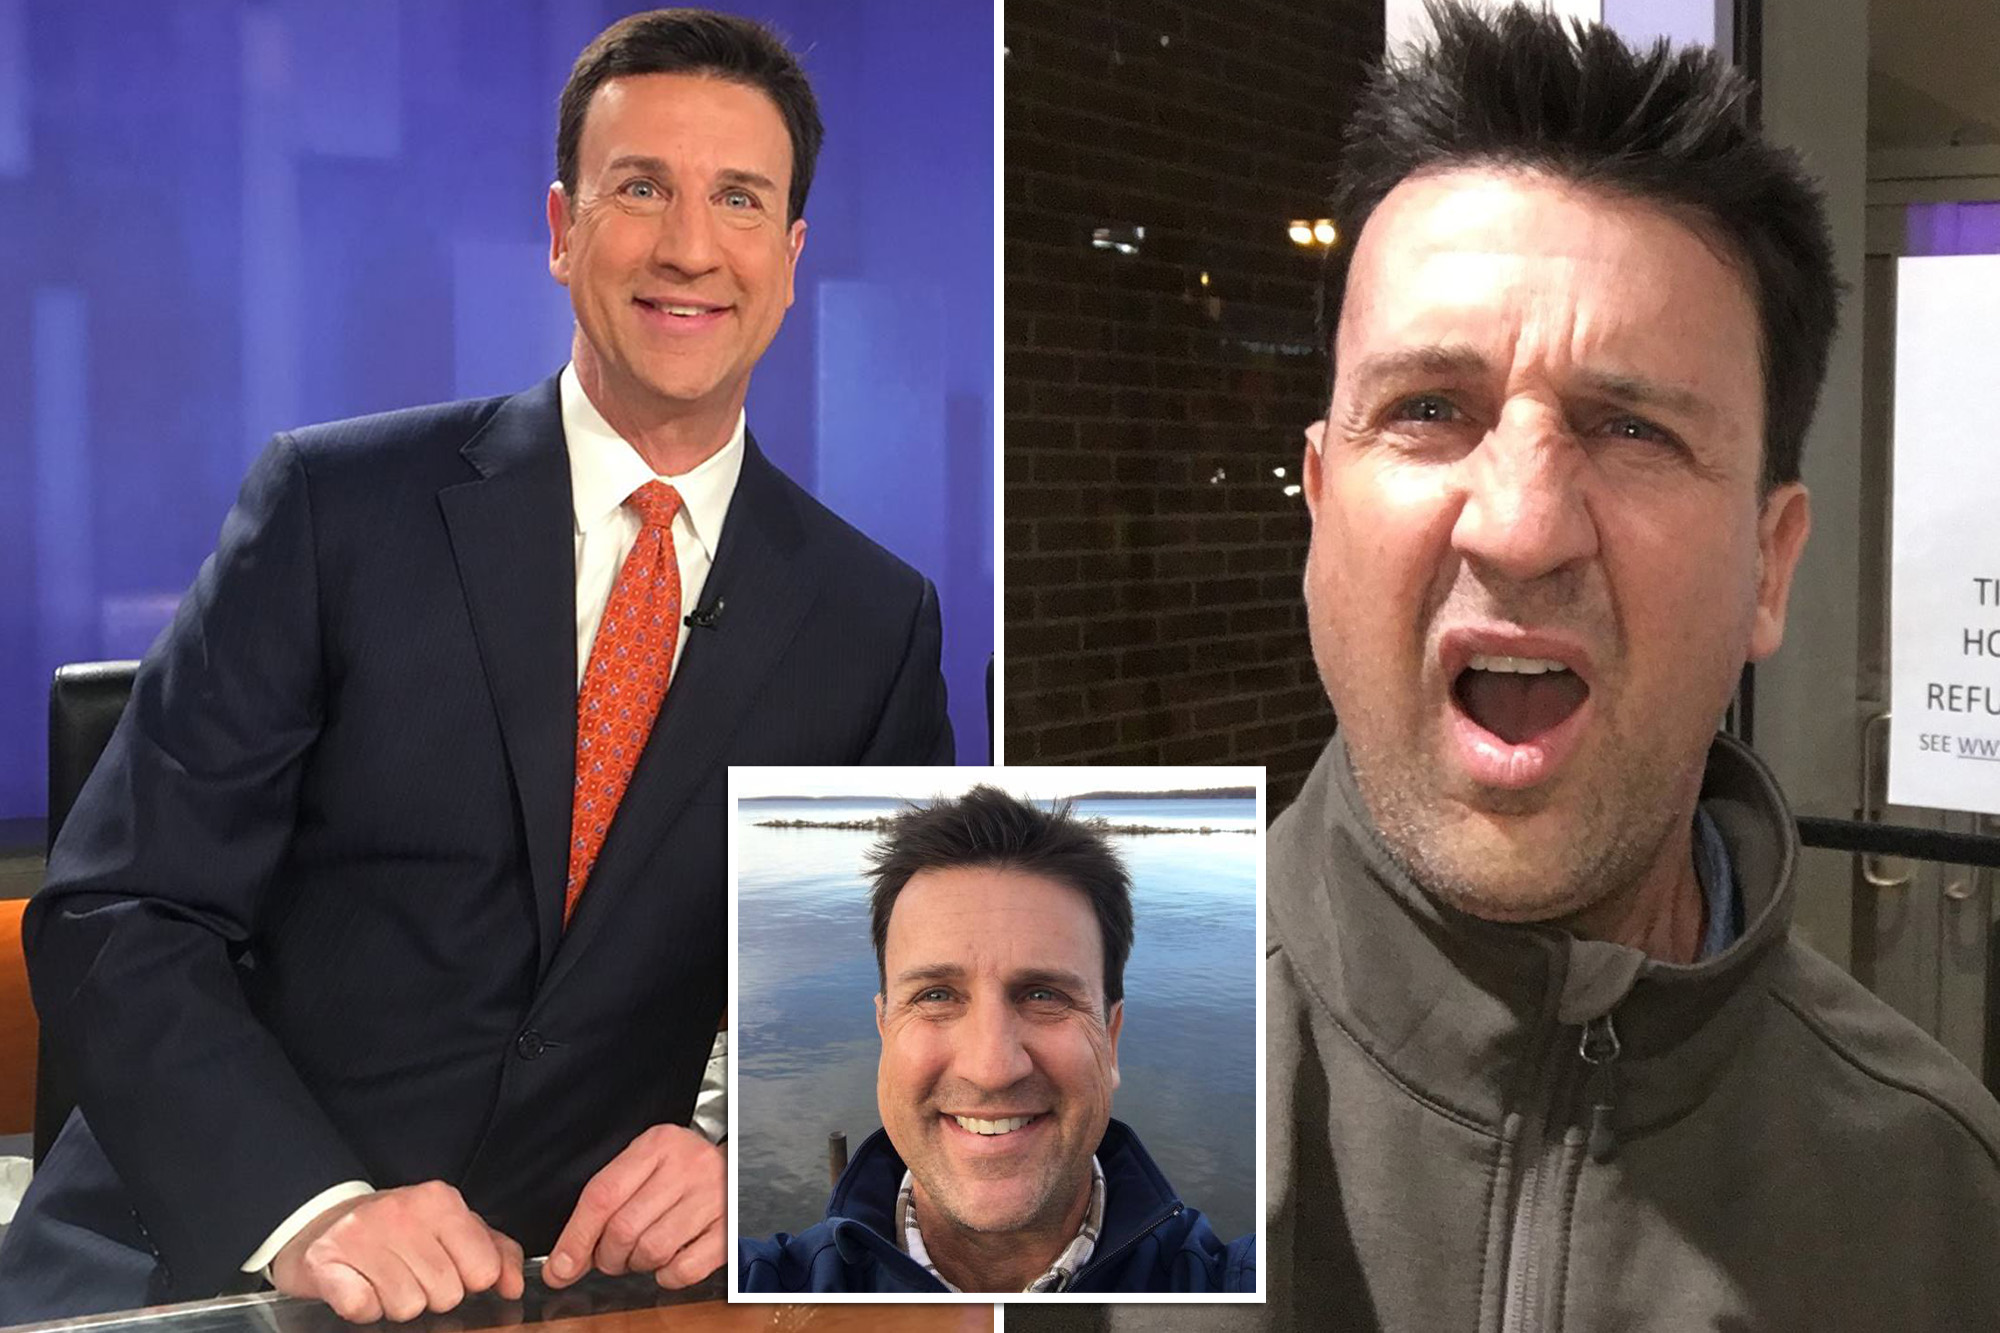 Louisiana TV anchor resigns after he was allegedly caught sexting 15-year-old girl — who turned out to be vigilante 'predator hunters'